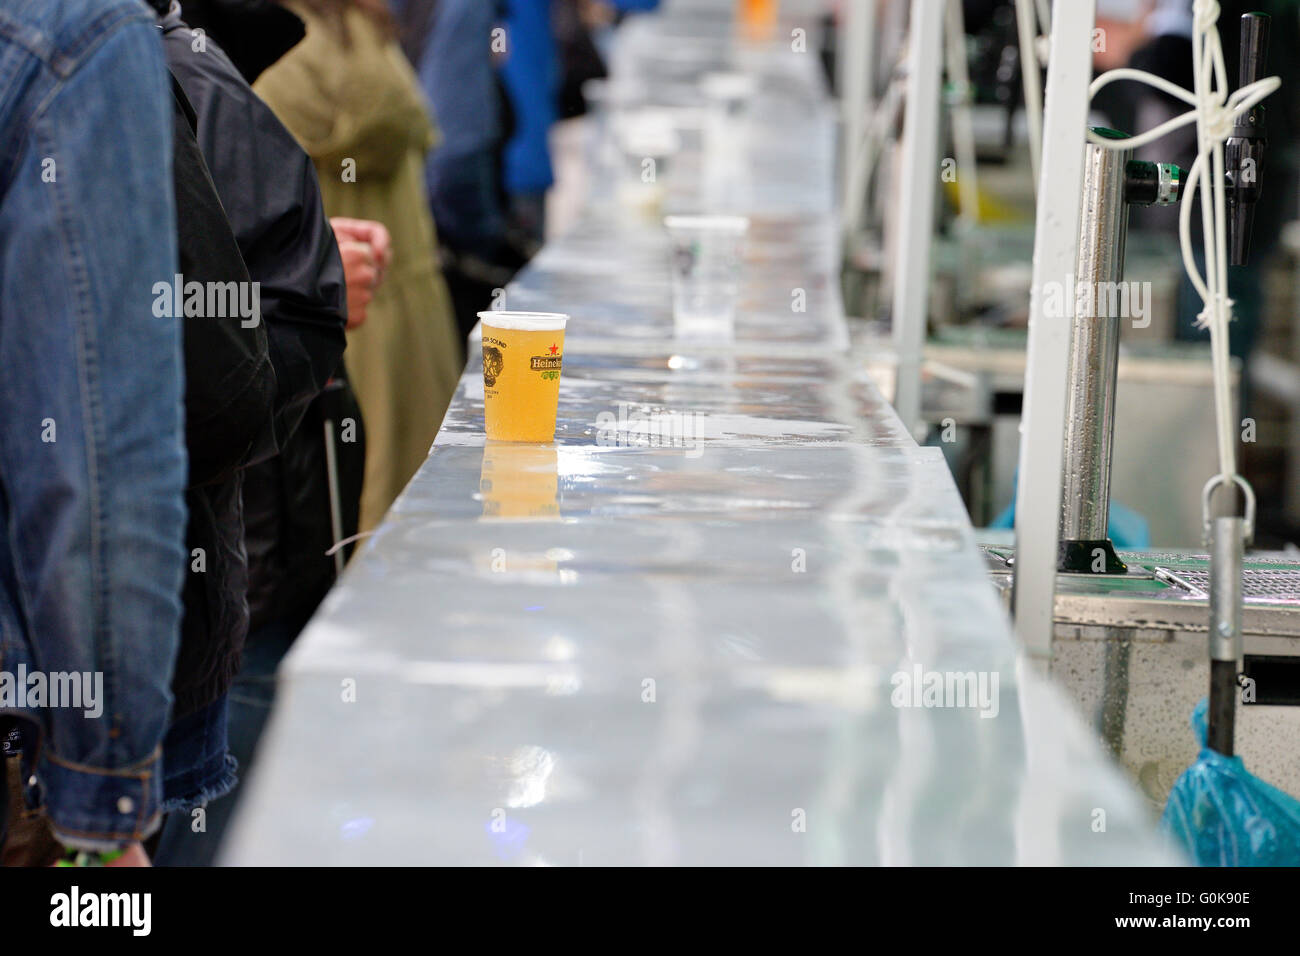 BARCELONA - MAY 30: A glass of beer on the bar at Heineken Primavera Sound 2014 Festival (PS14). Stock Photo